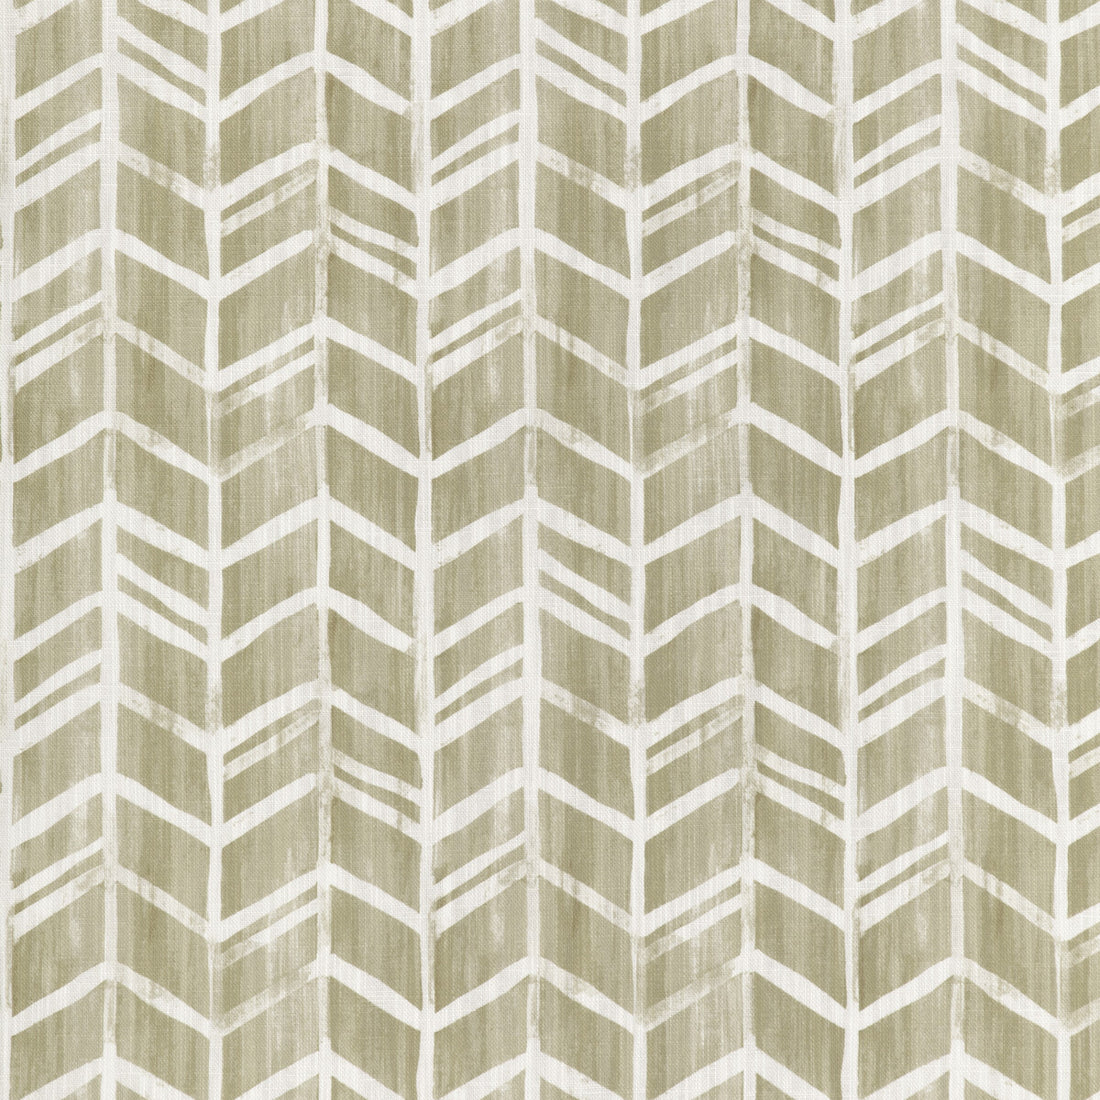 Dont Fret fabric in linen color - pattern DONT FRET.161.0 - by Kravet Basics in the Small Scale Prints collection